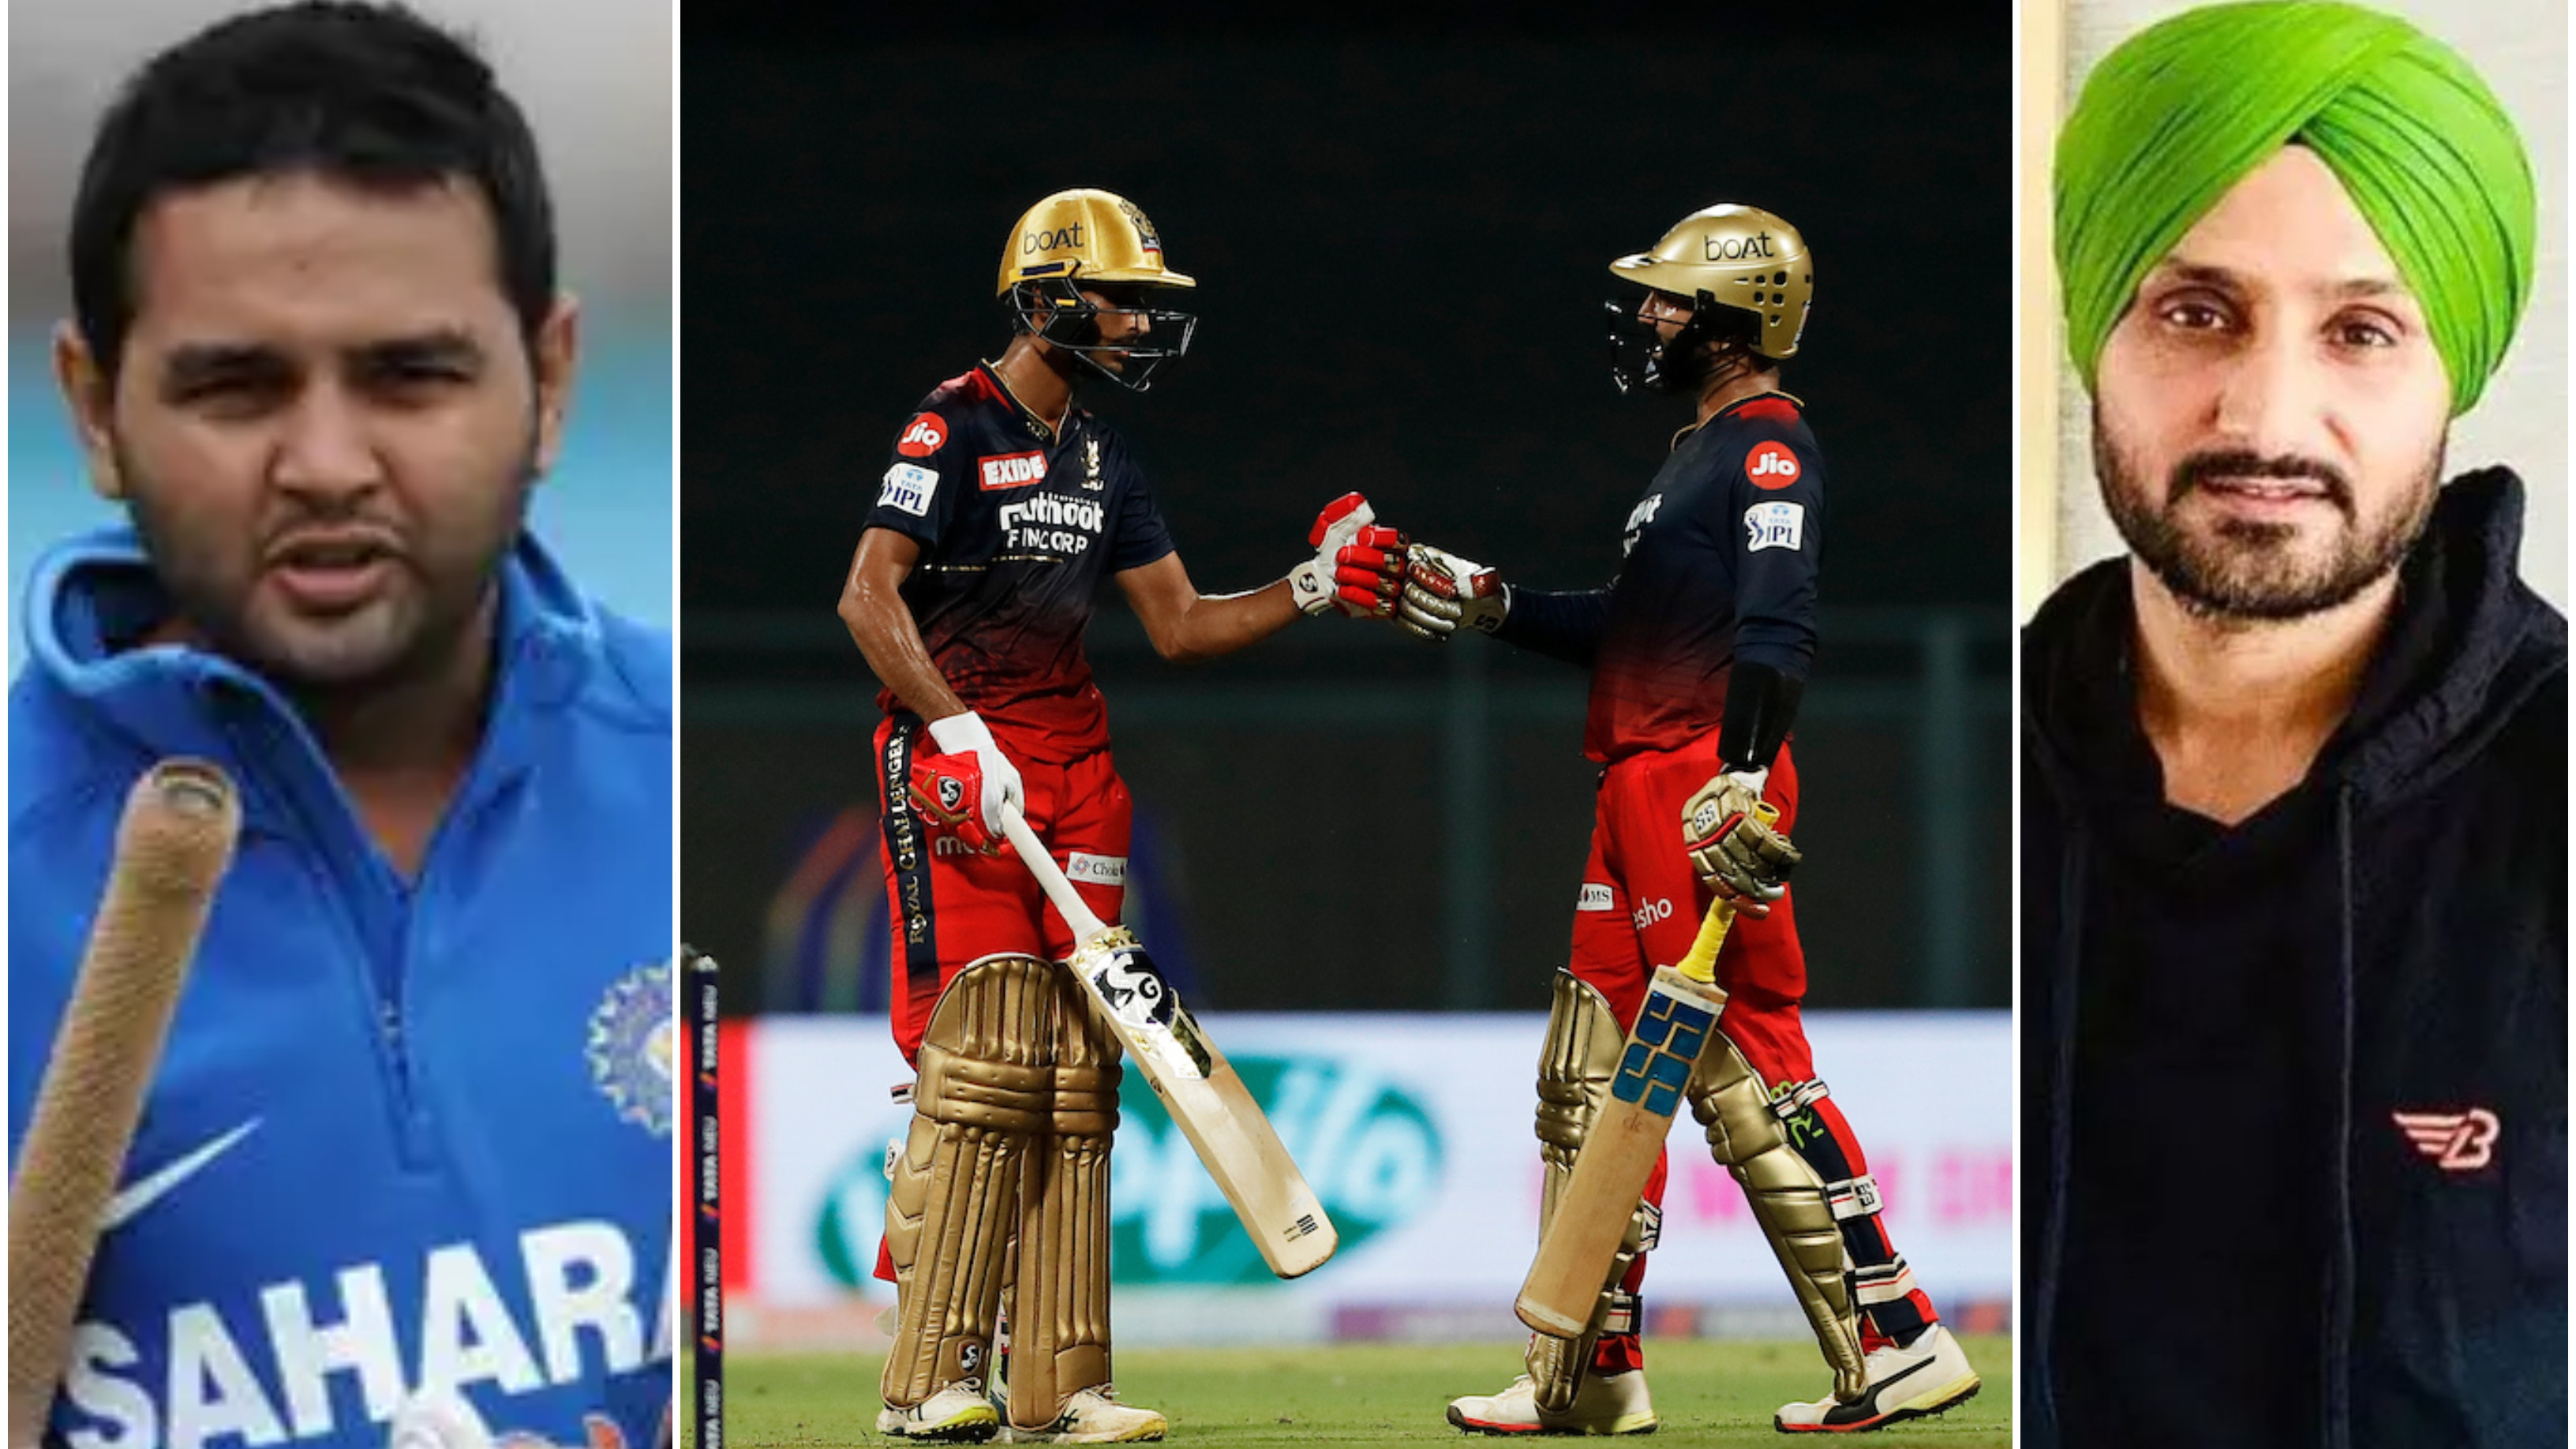 IPL 2022: Cricket fraternity reacts as Dinesh Karthik, Shahbaz Ahmed power RCB to hard-fought win